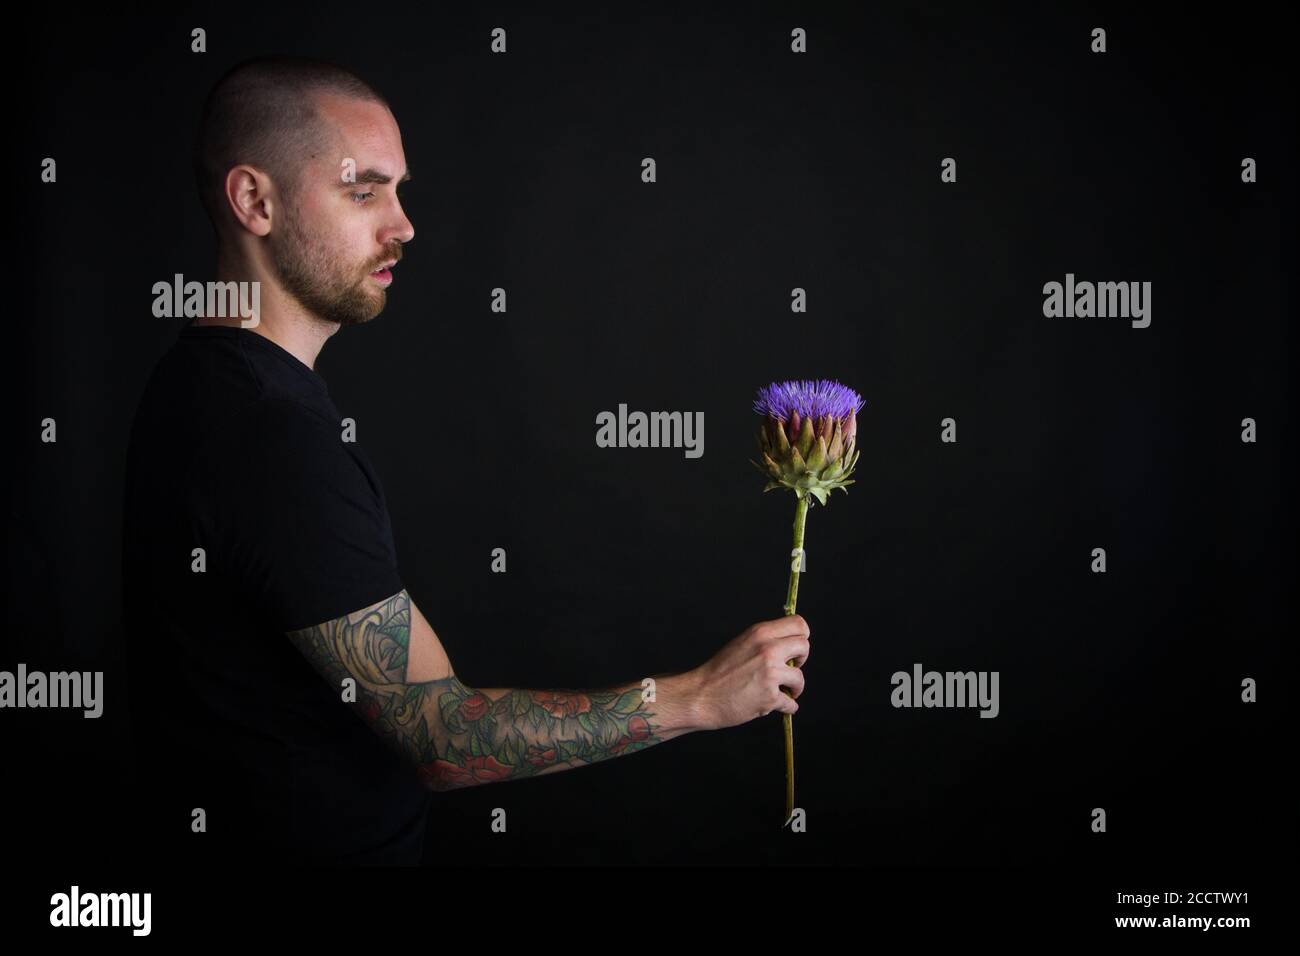 Portrait of young man holding purple artichoke flower on black background, greeting card or concept Stock Photo